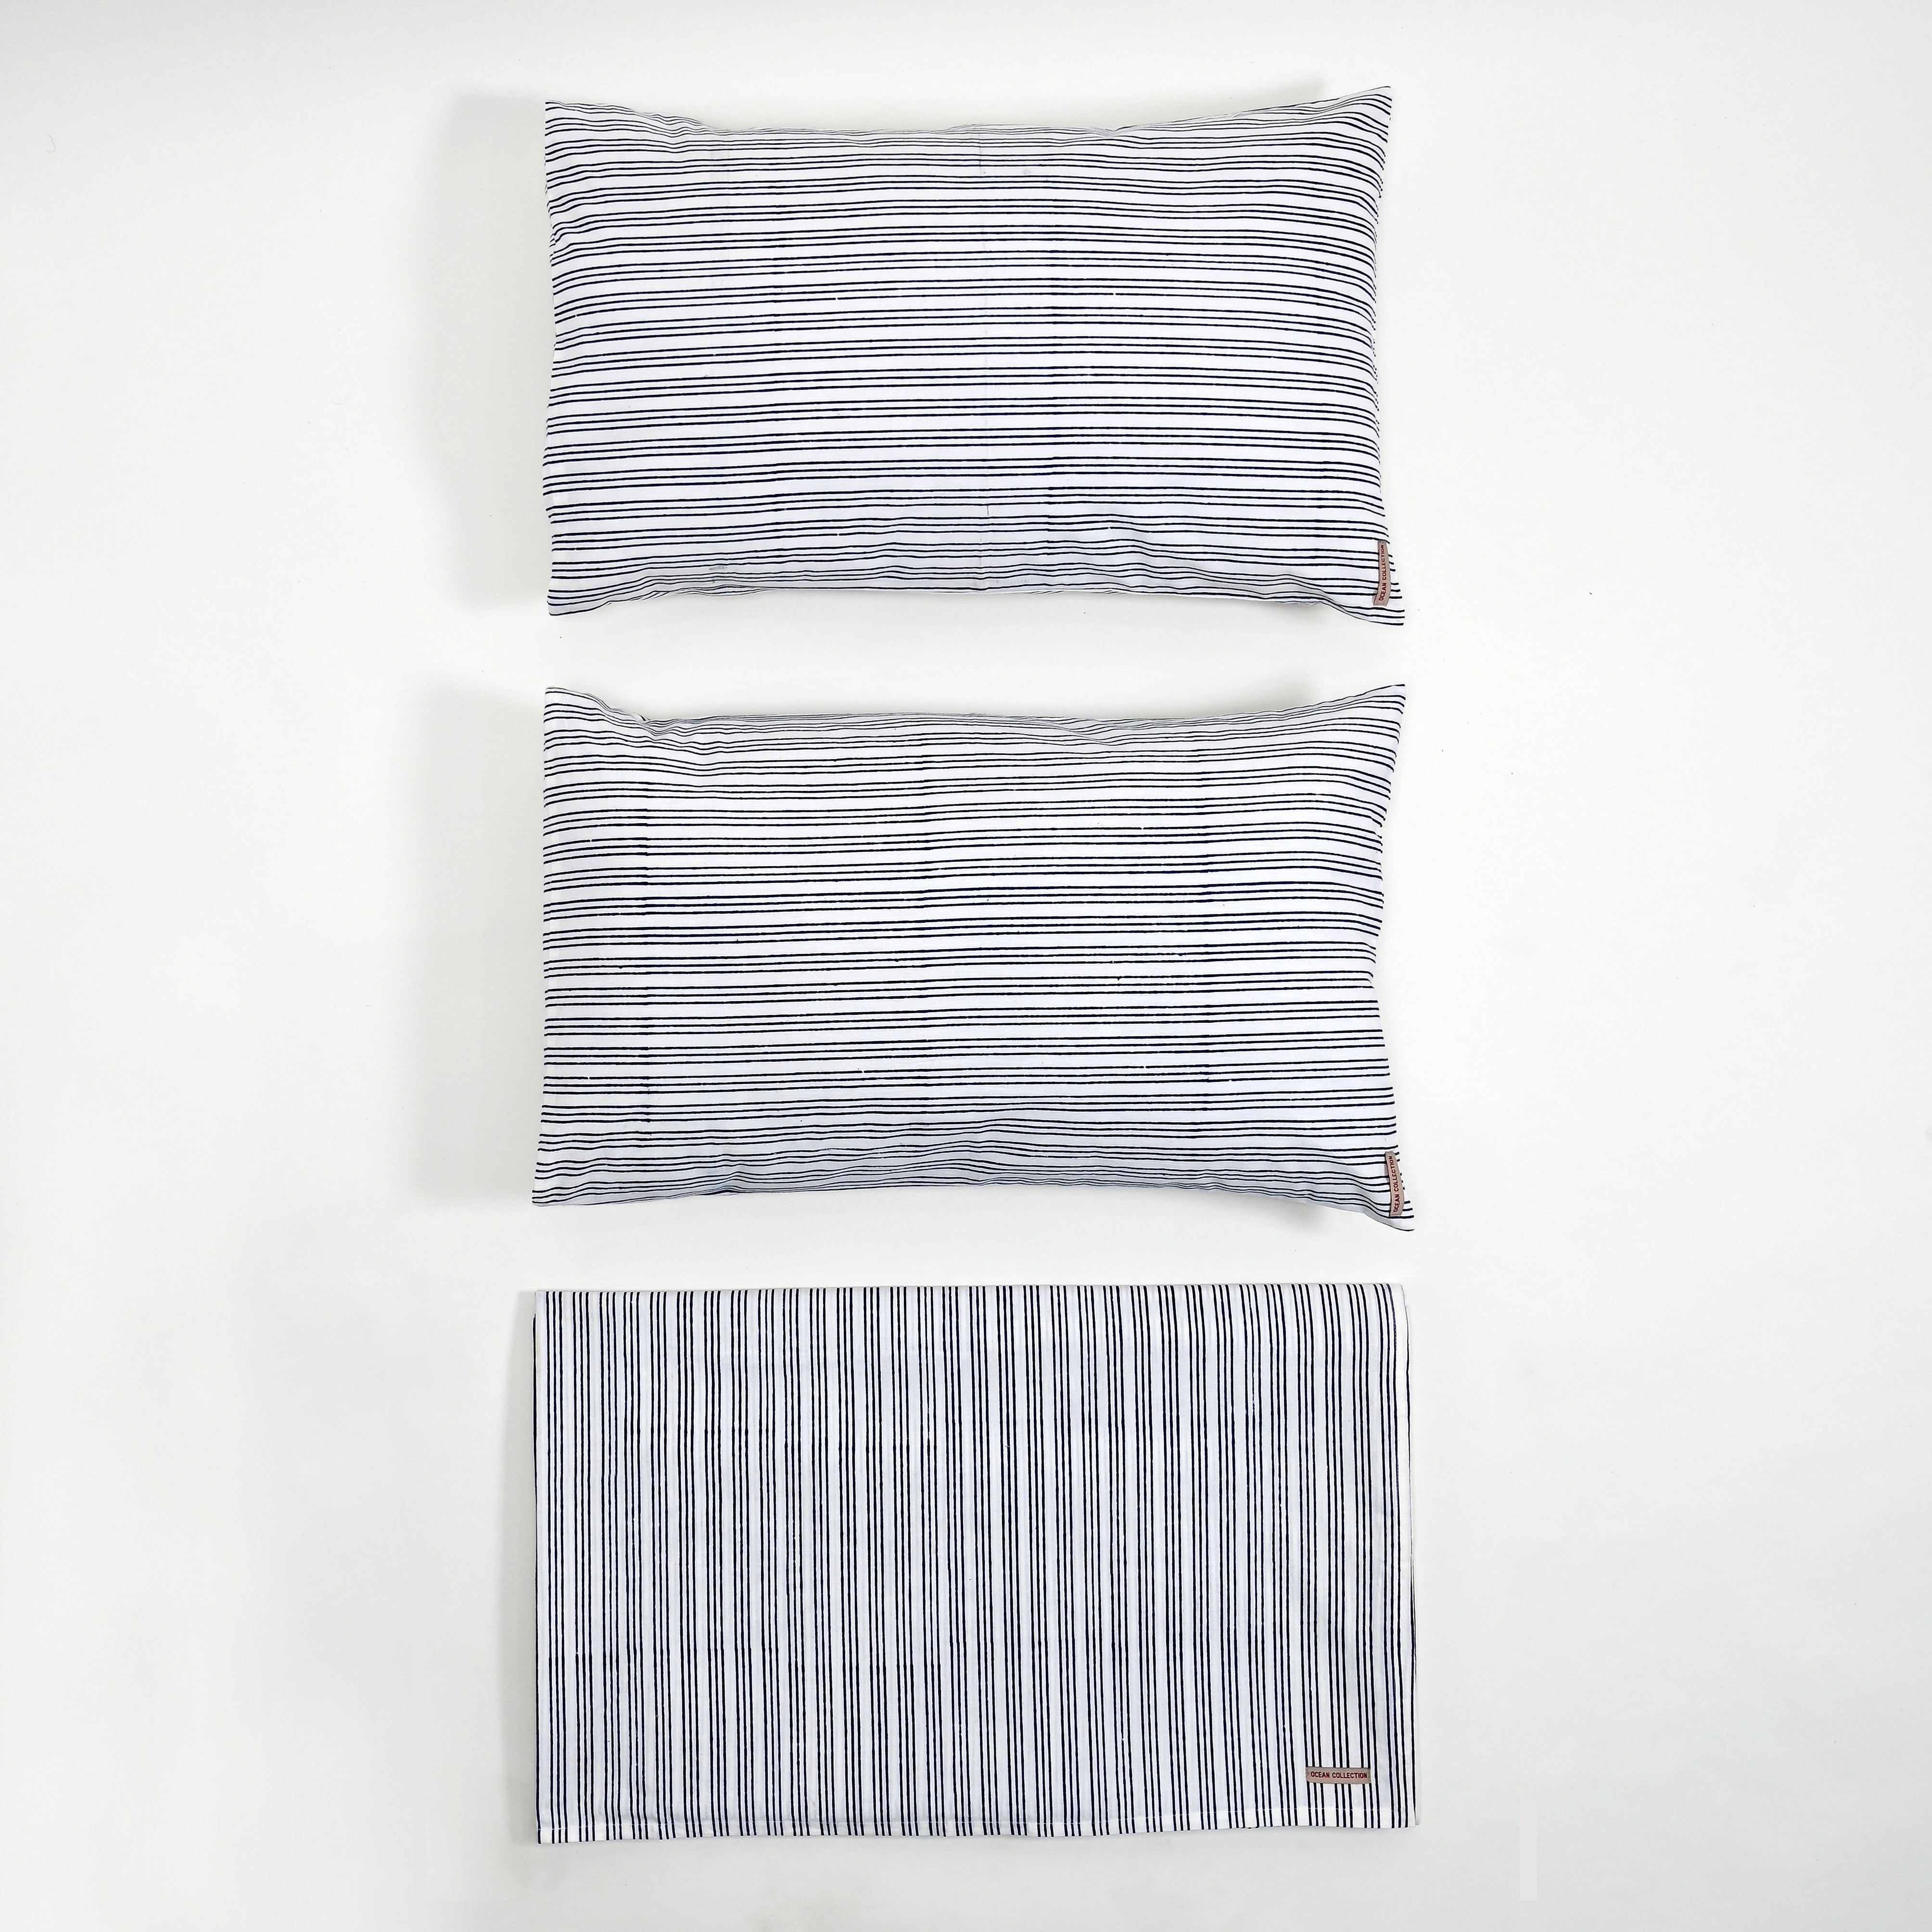 Triple Stripes Blue Block Printed Bed Sheet with set of shams